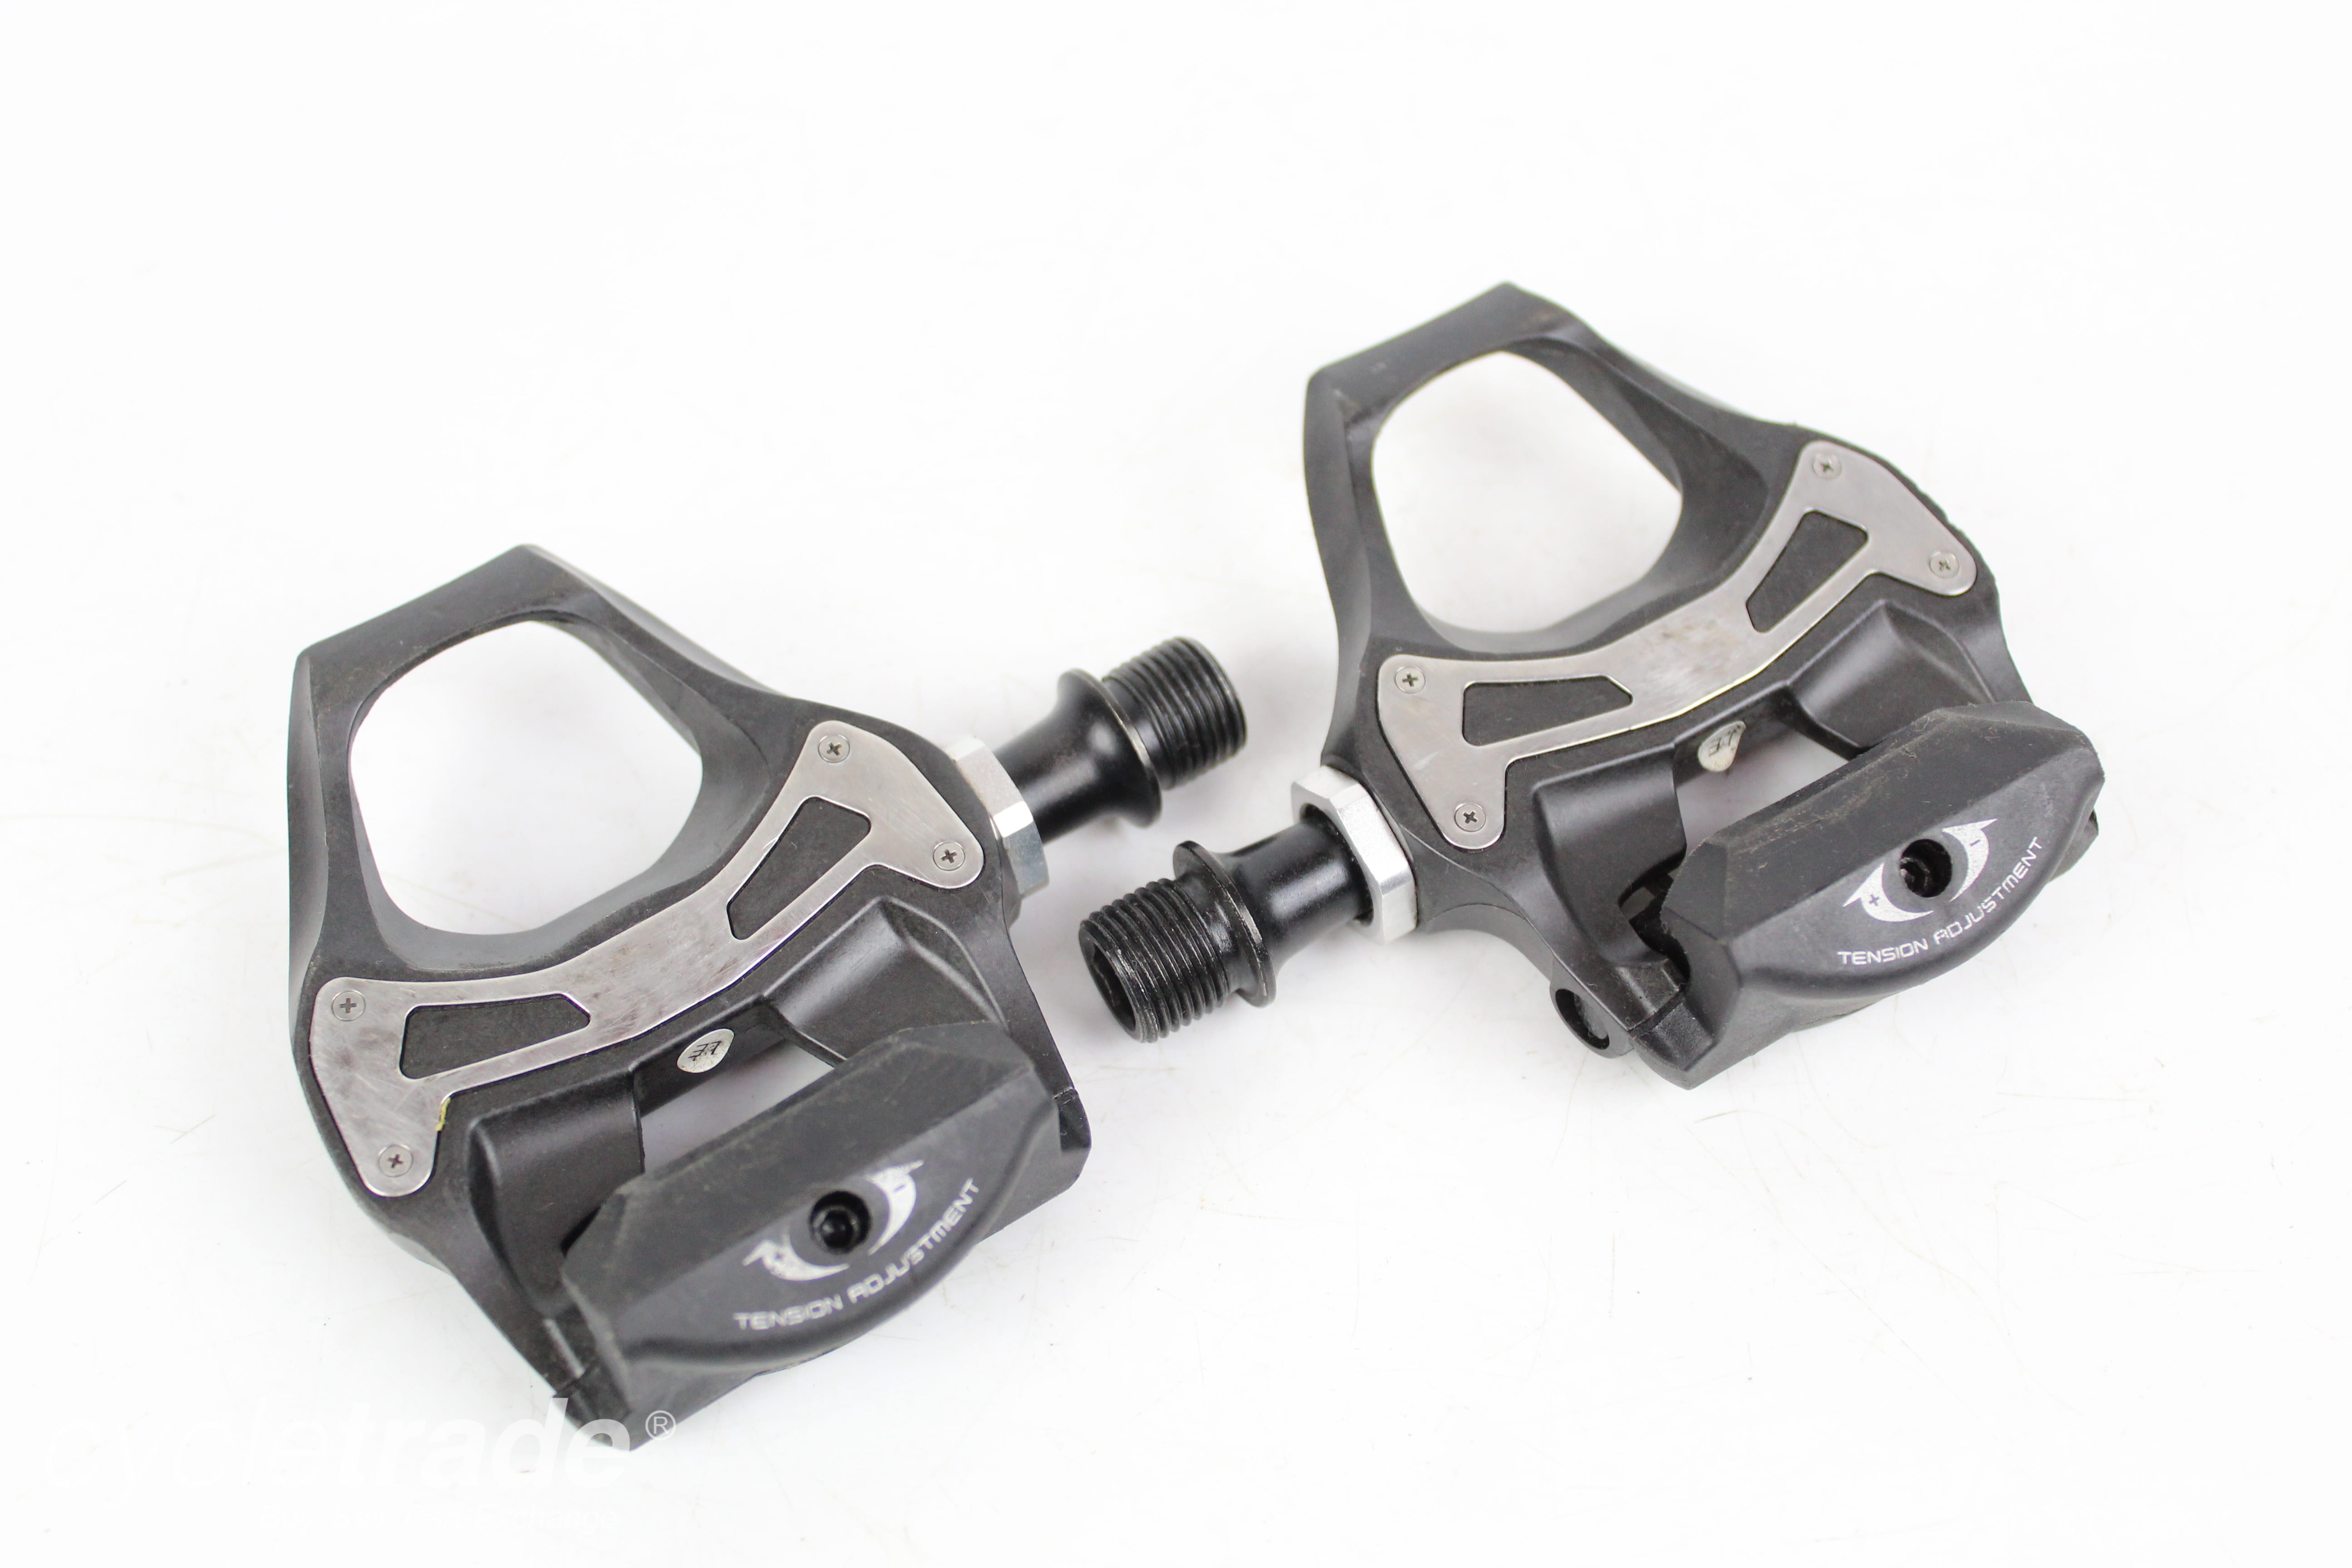 2nd Hand Pedals - Shimano 105 PD-5700-C Carbon - Grade B